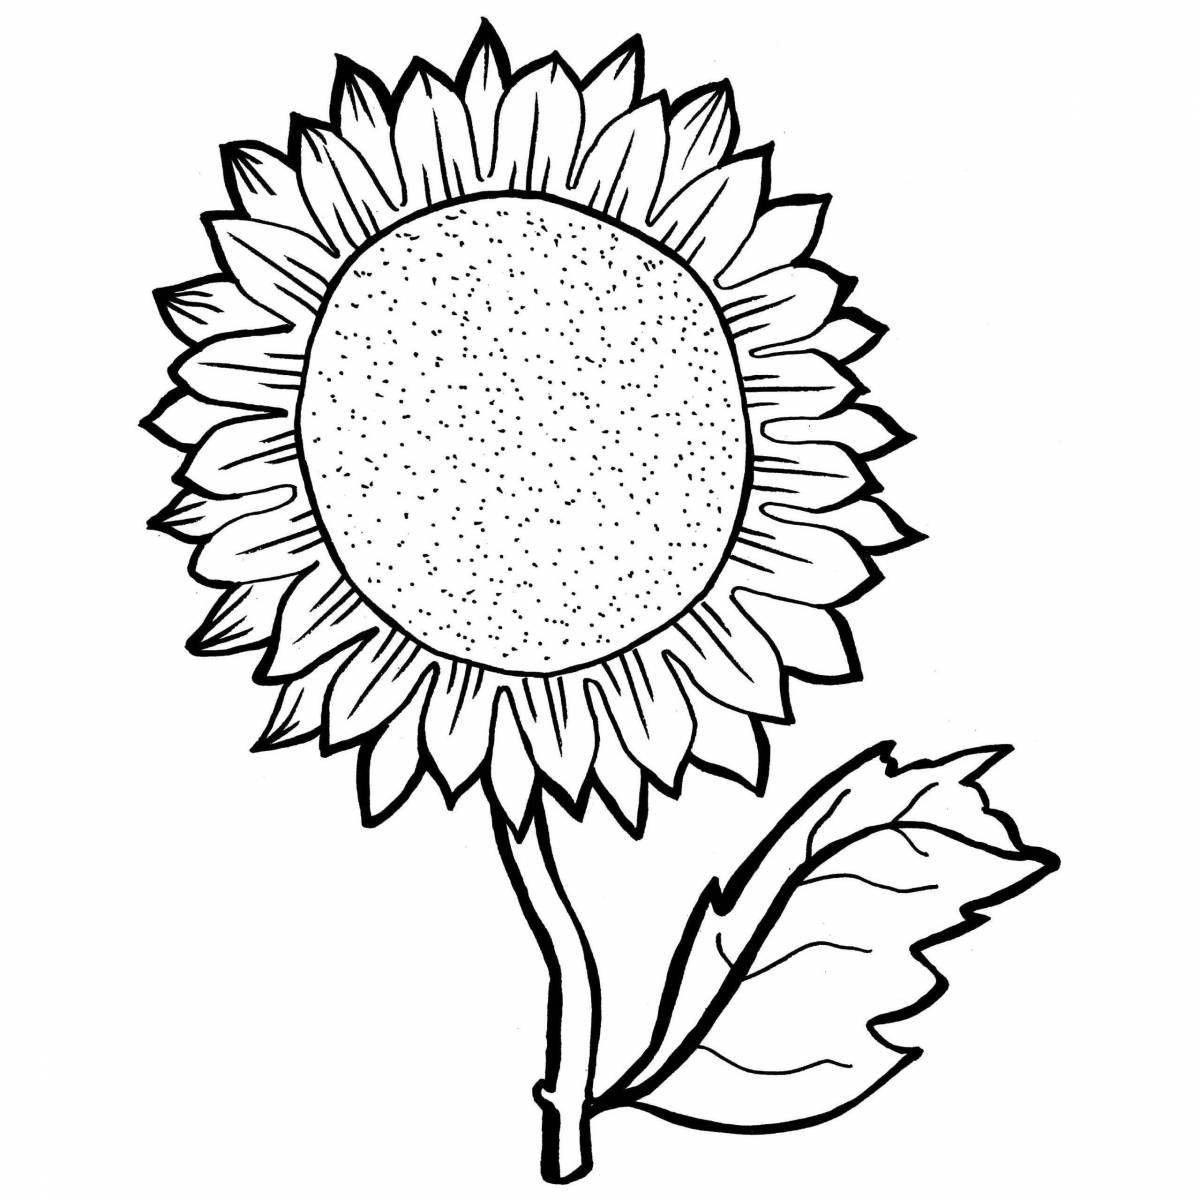 Exquisite sunflowers coloring book for kids